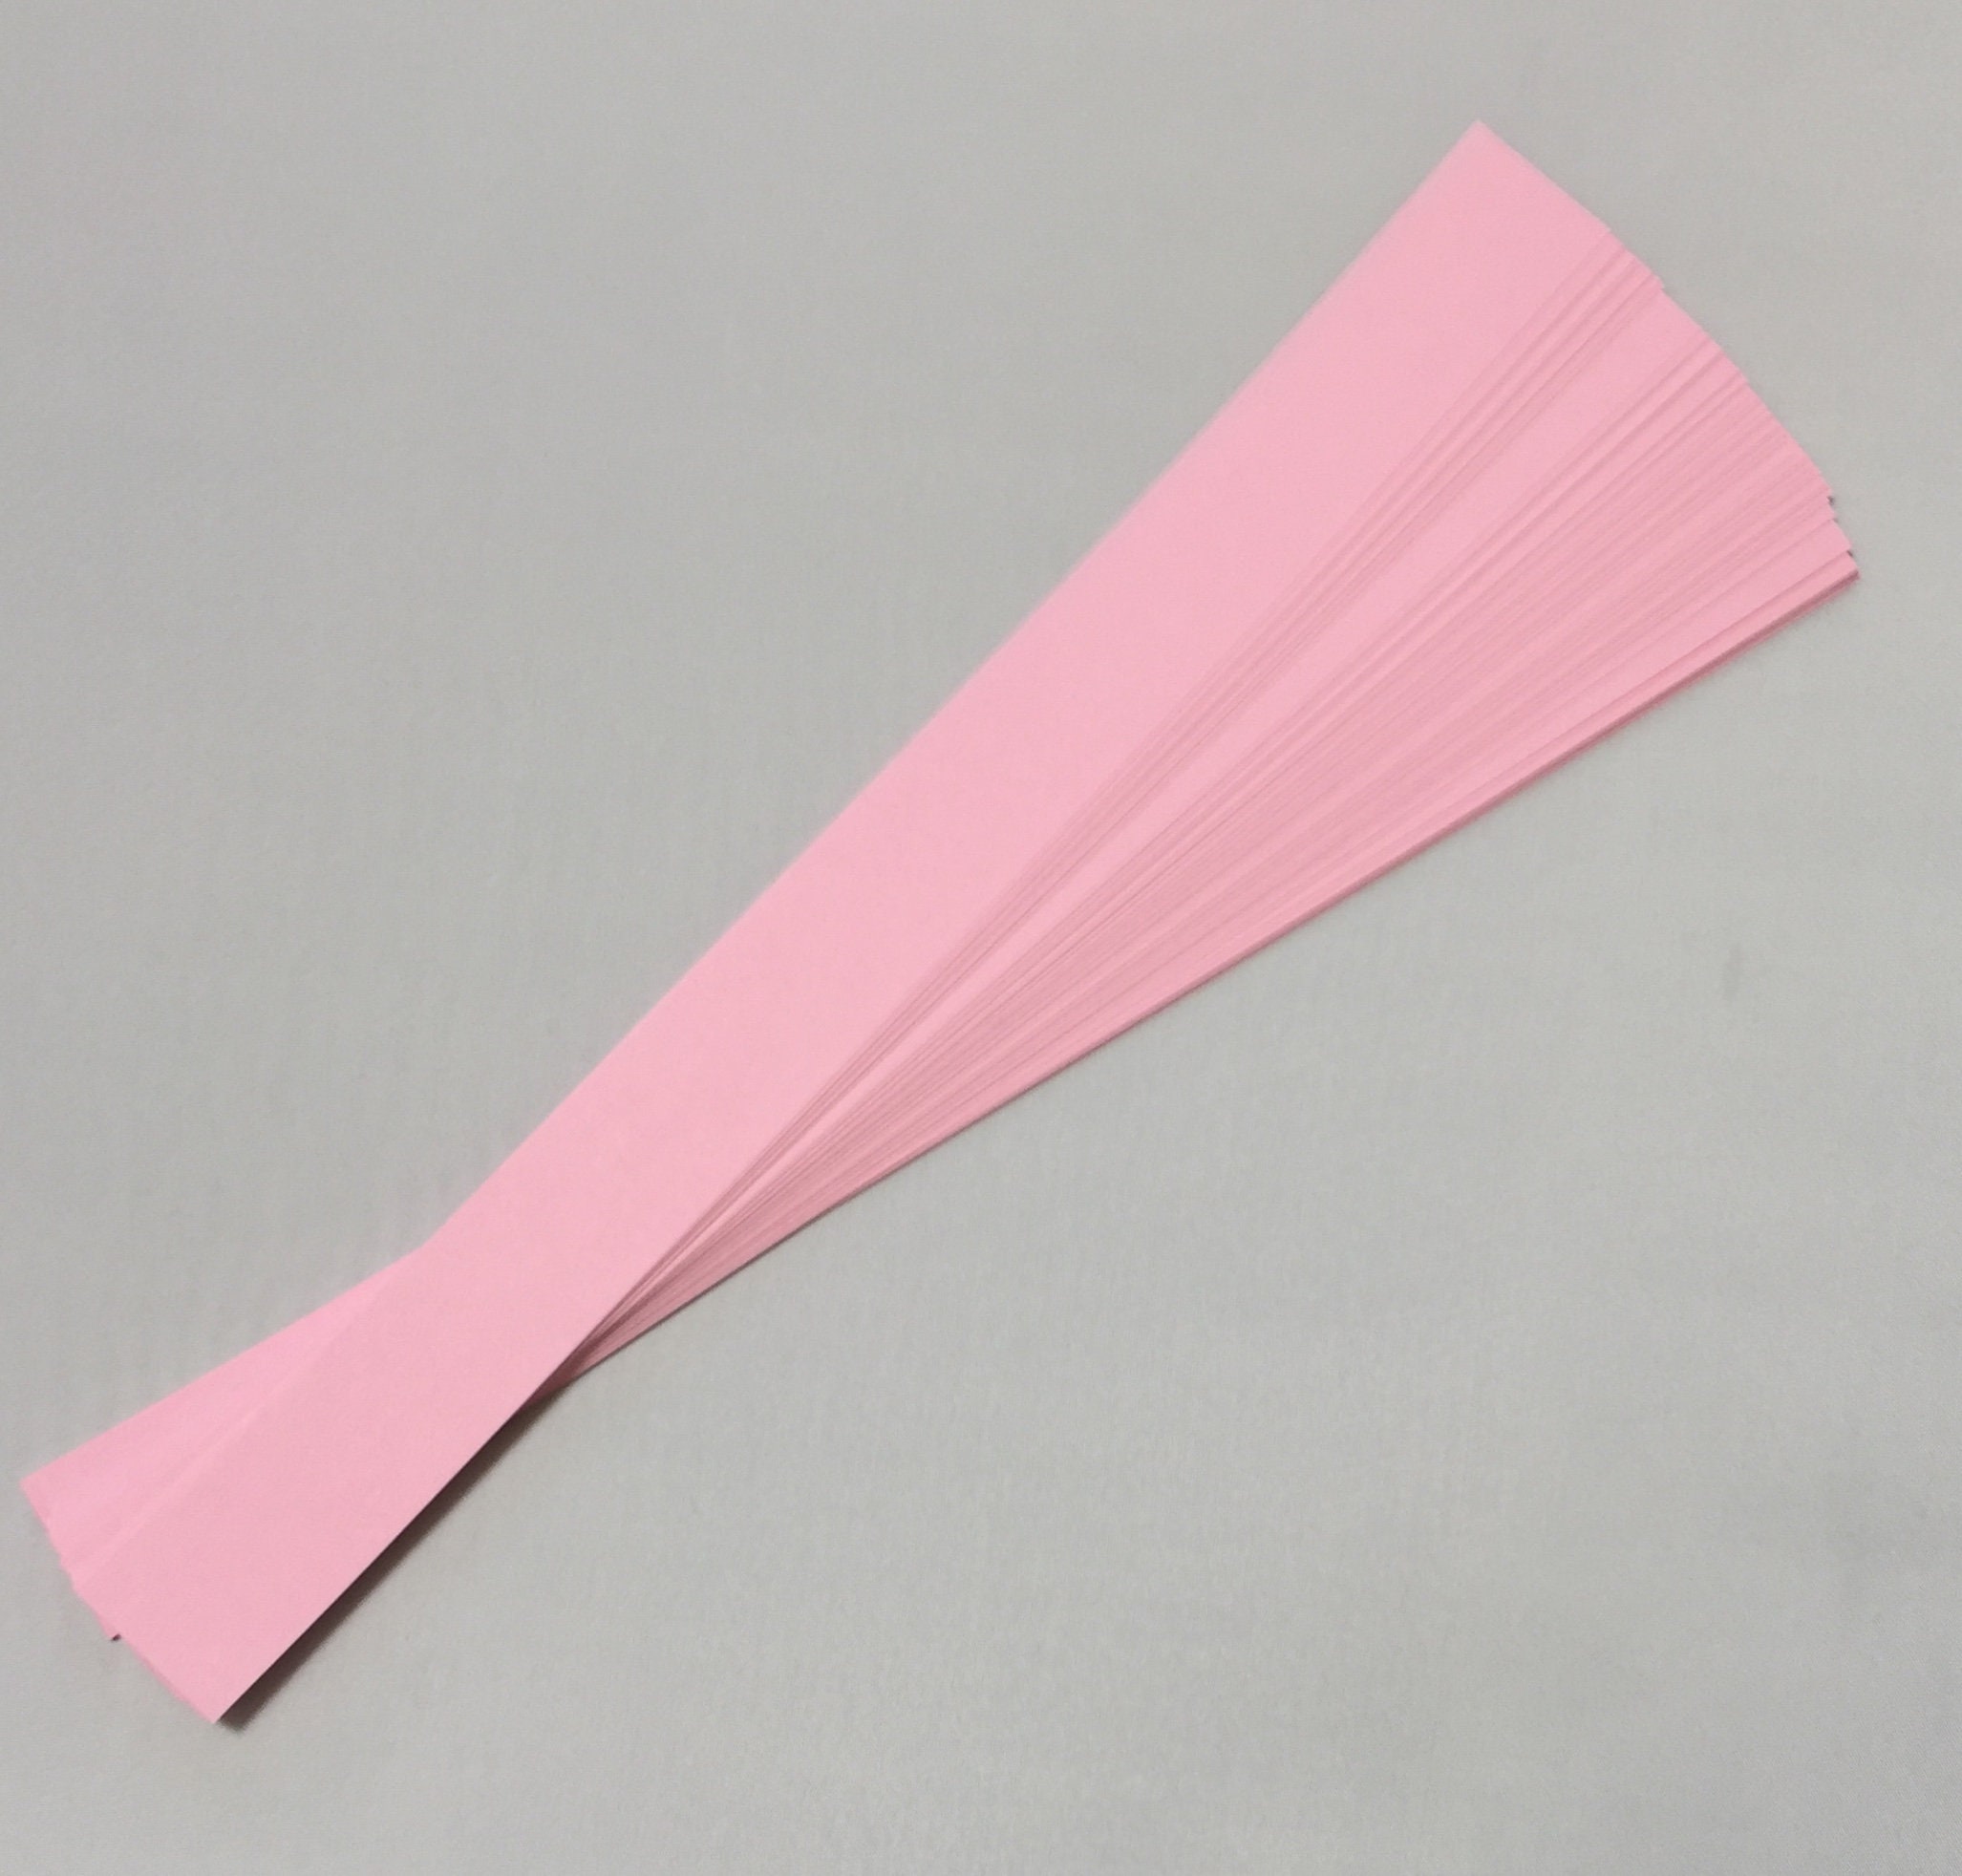 Paper Strips for Arts & Crafts. Pastel Color Paper Strips. Size is 1x 11 .  Quantity is 50 Strips 